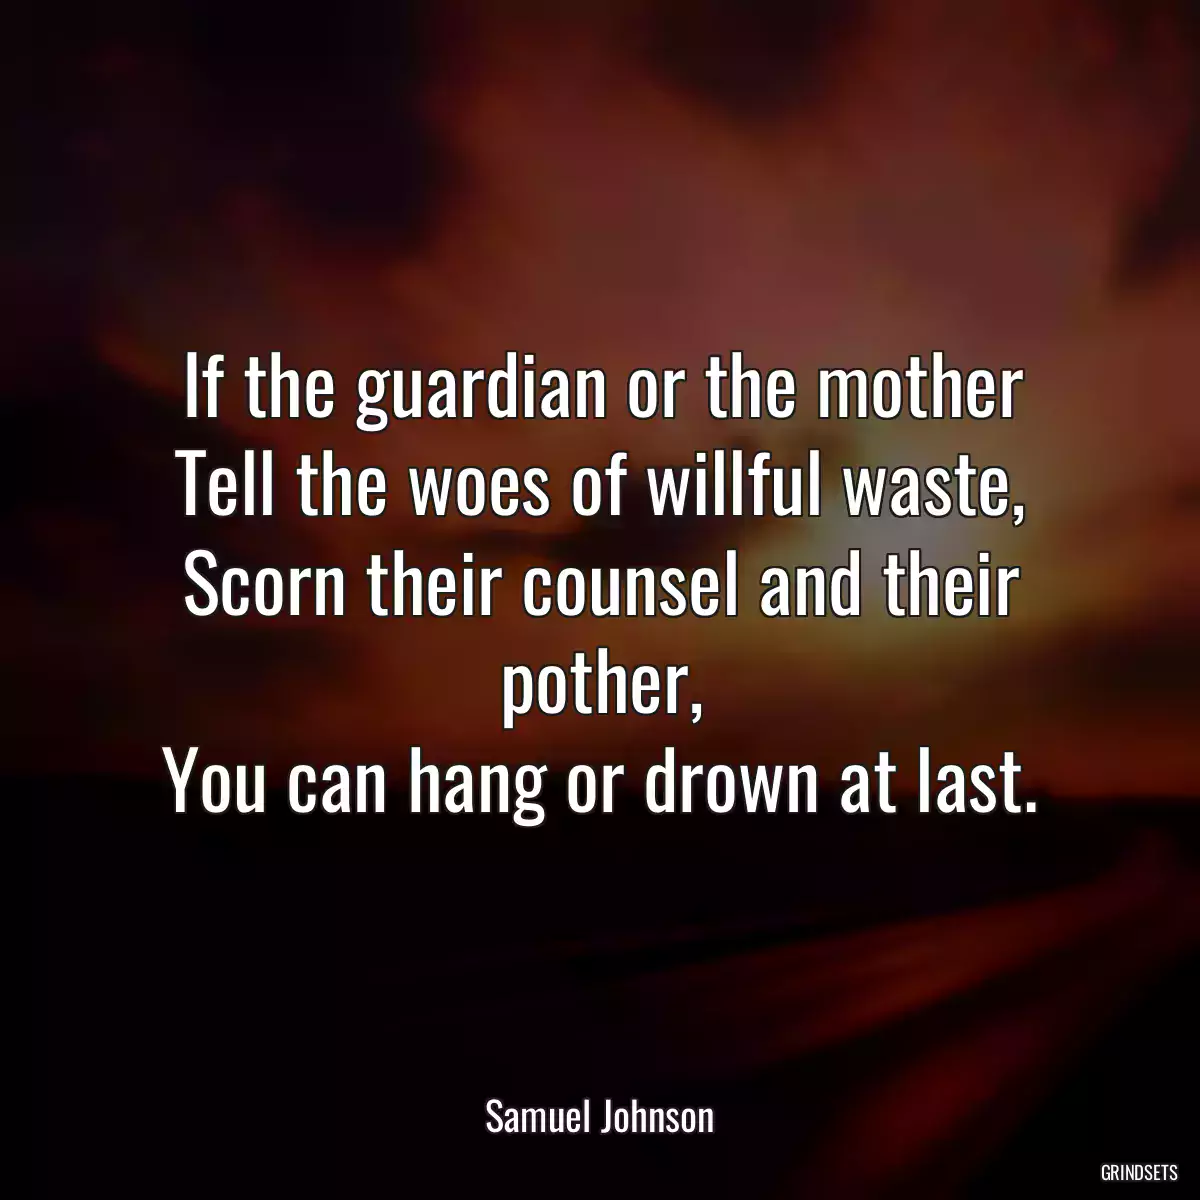 If the guardian or the mother
Tell the woes of willful waste,
Scorn their counsel and their pother,
You can hang or drown at last.